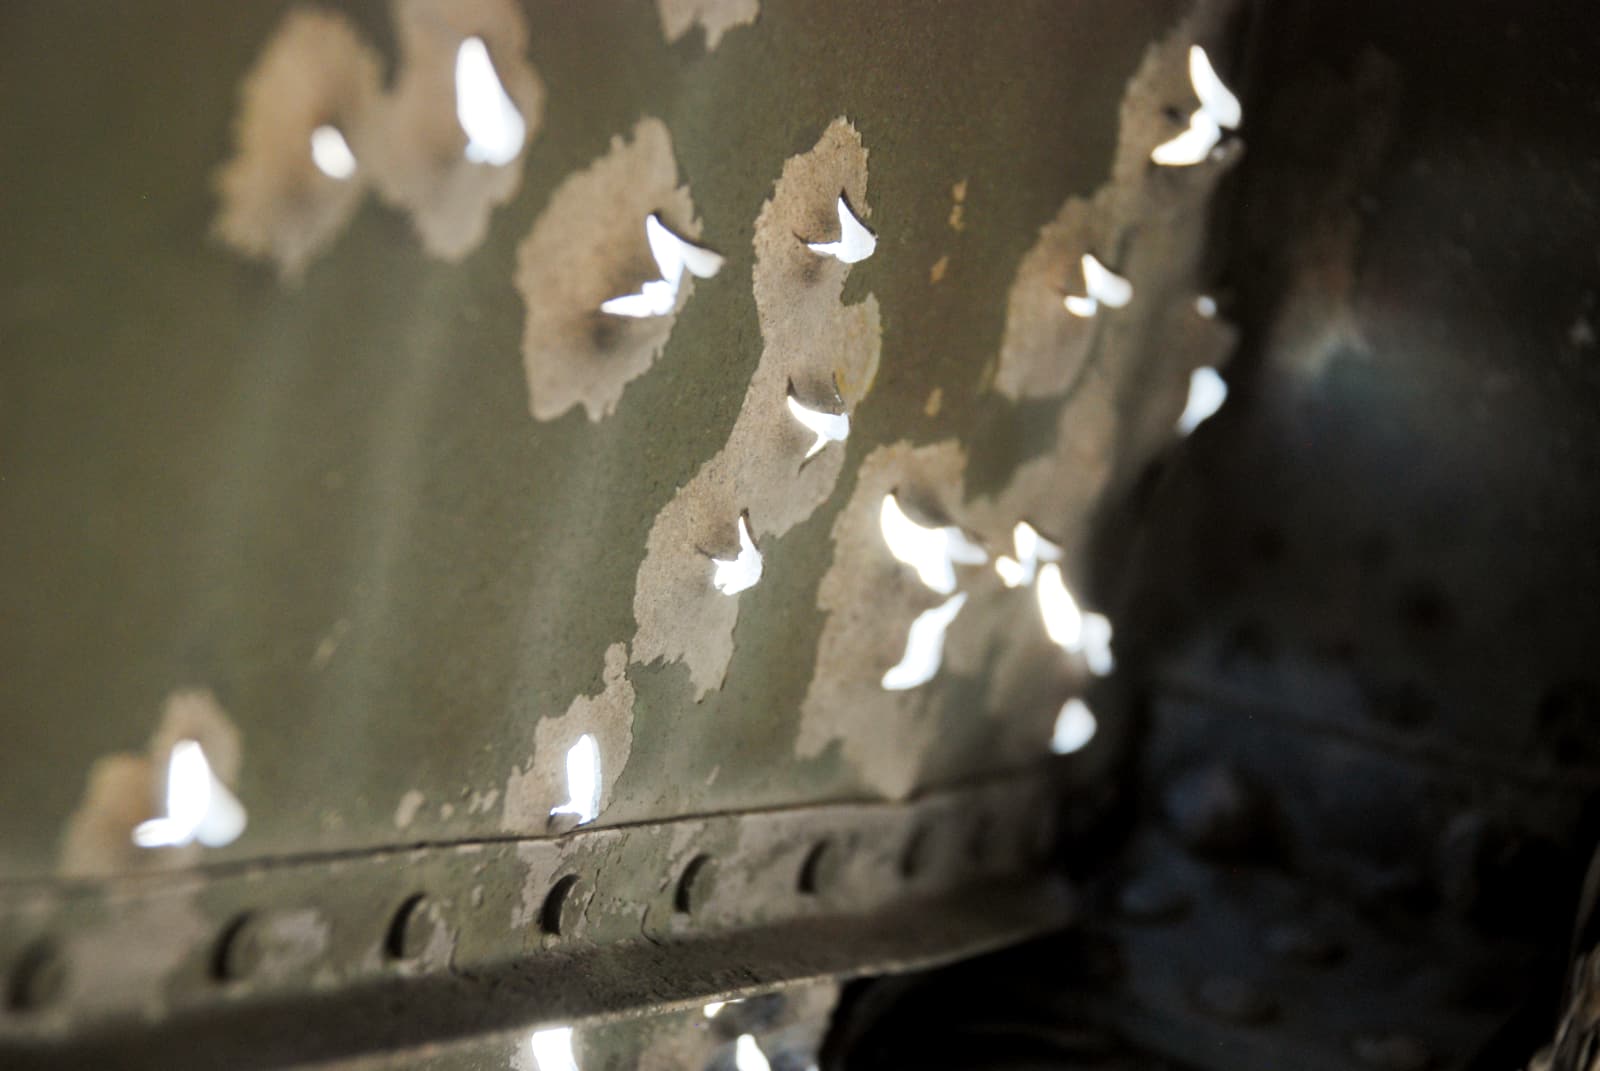 Interior of the fuselage with 16 bullet holes